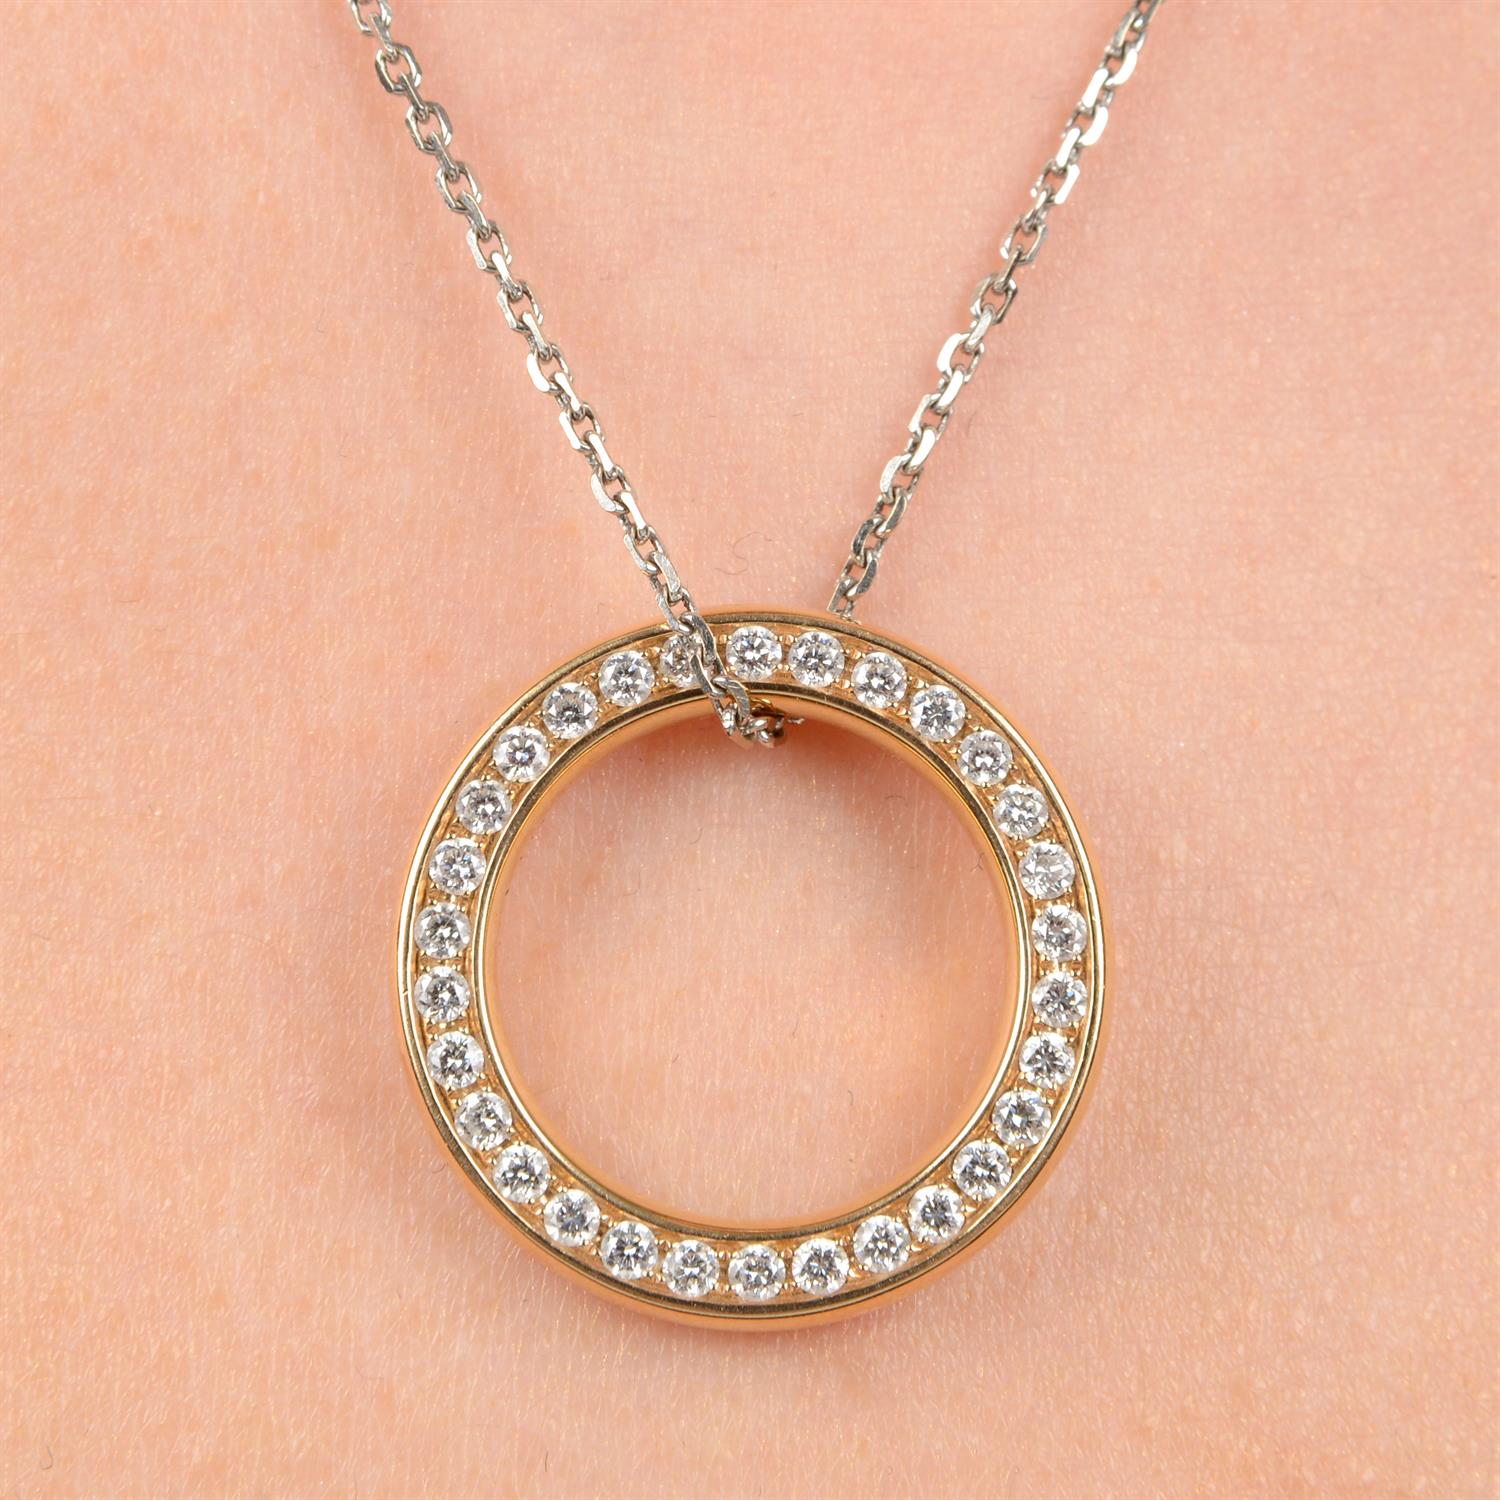 18ct gold diamond pendant, with chain - Image 4 of 4